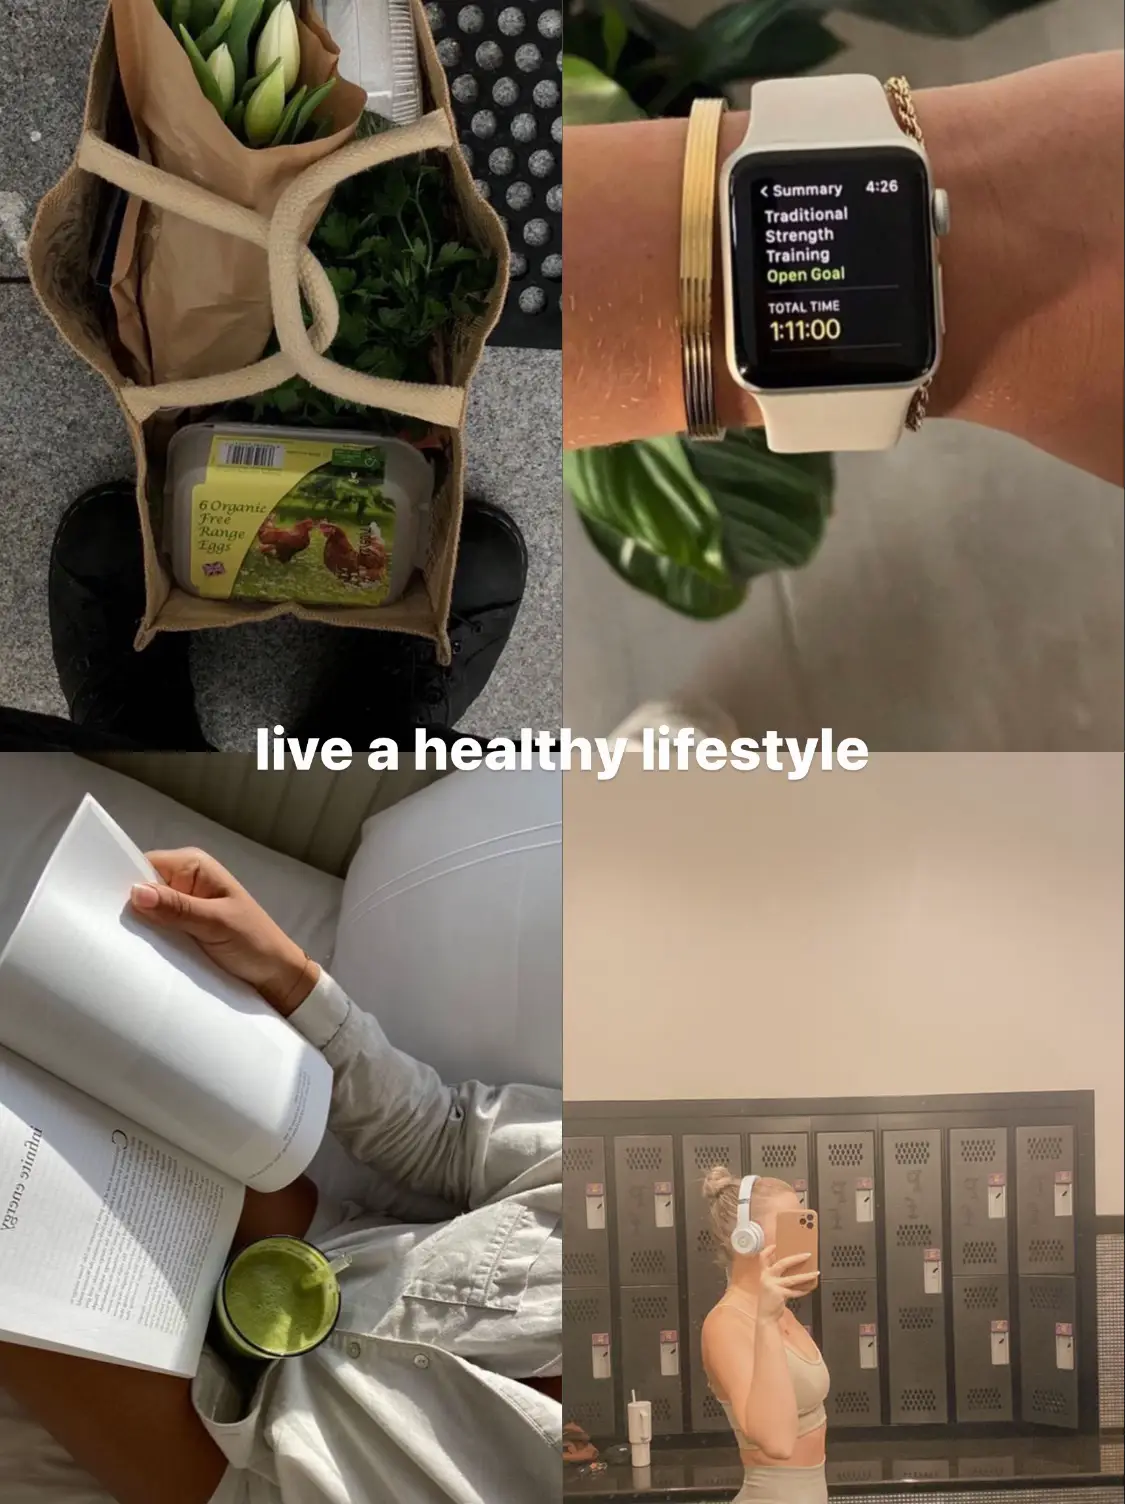  A collage of images and text that says "Live a healthy lifestyle" and "finite energy".